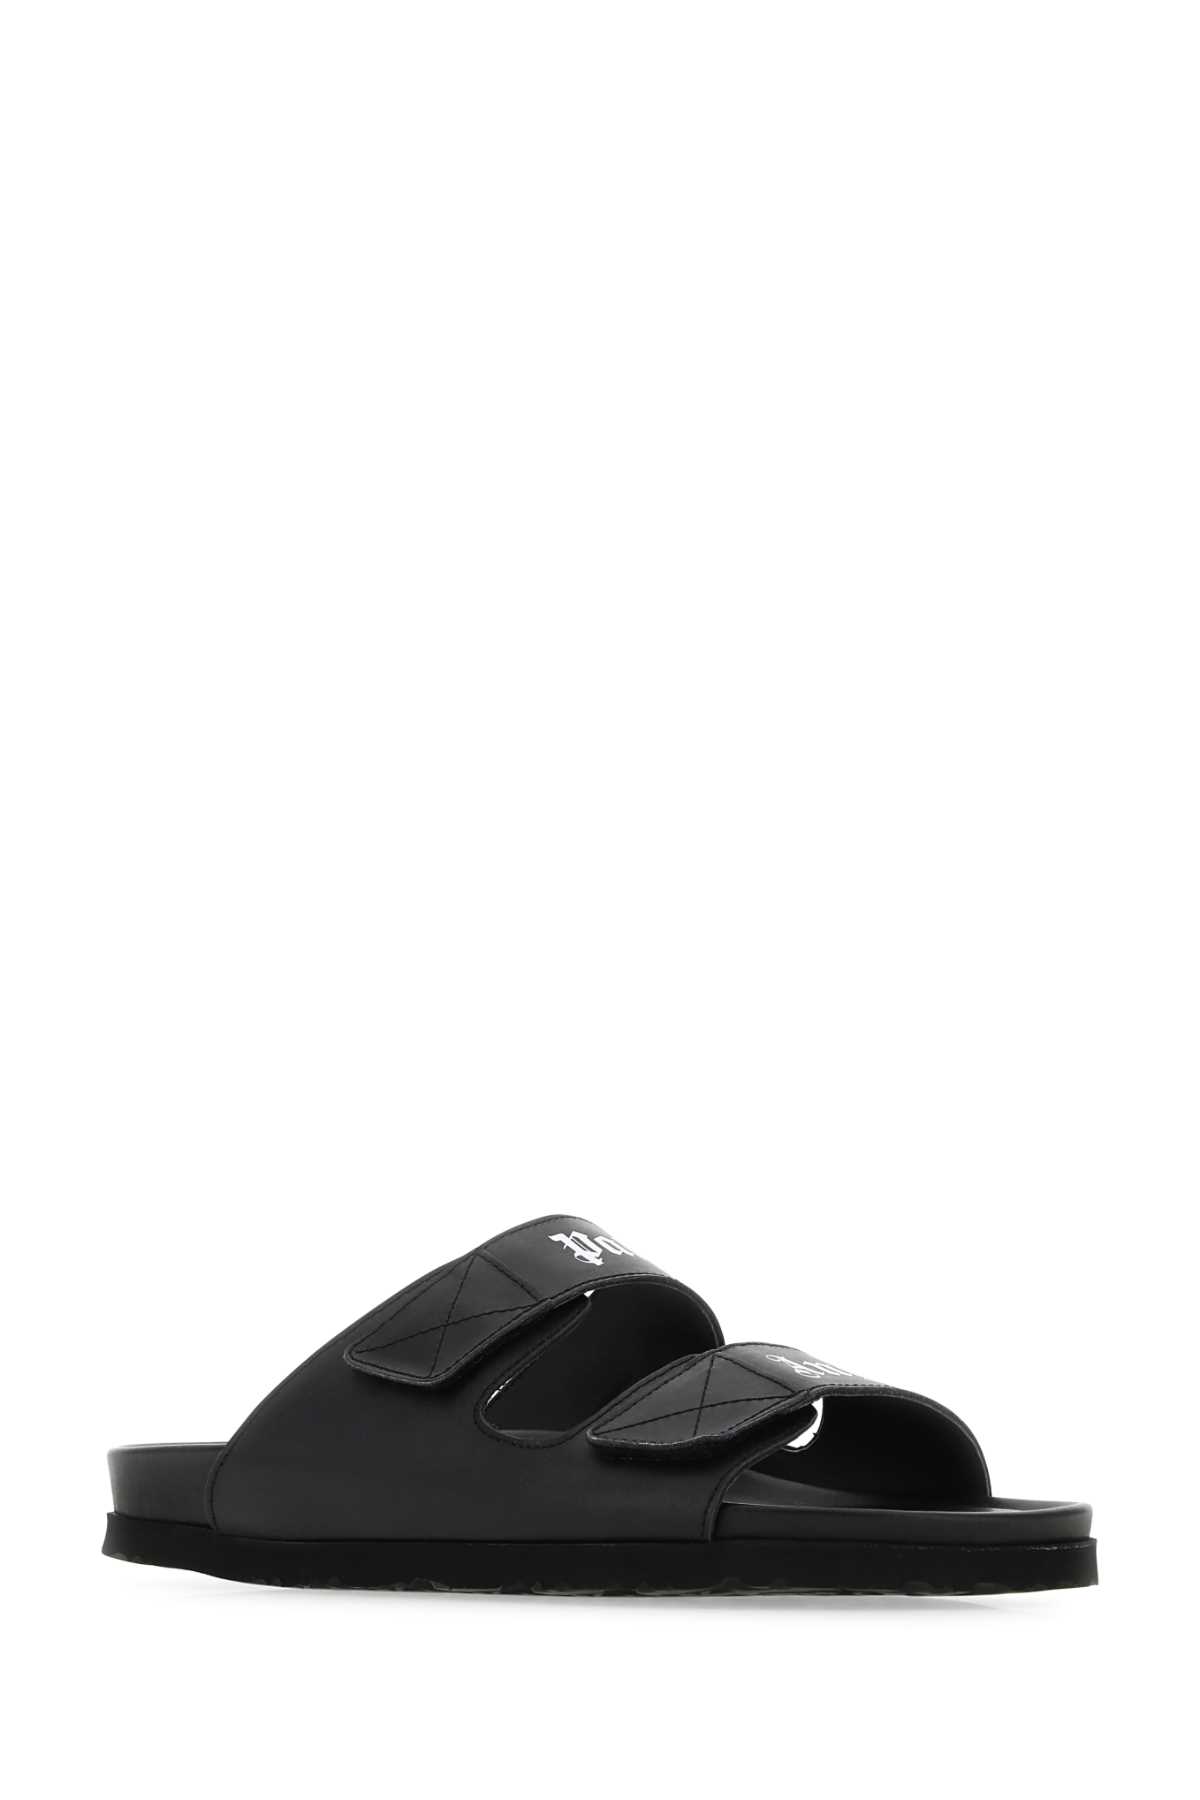 Palm Angels Black Leather Slippers In Black&white